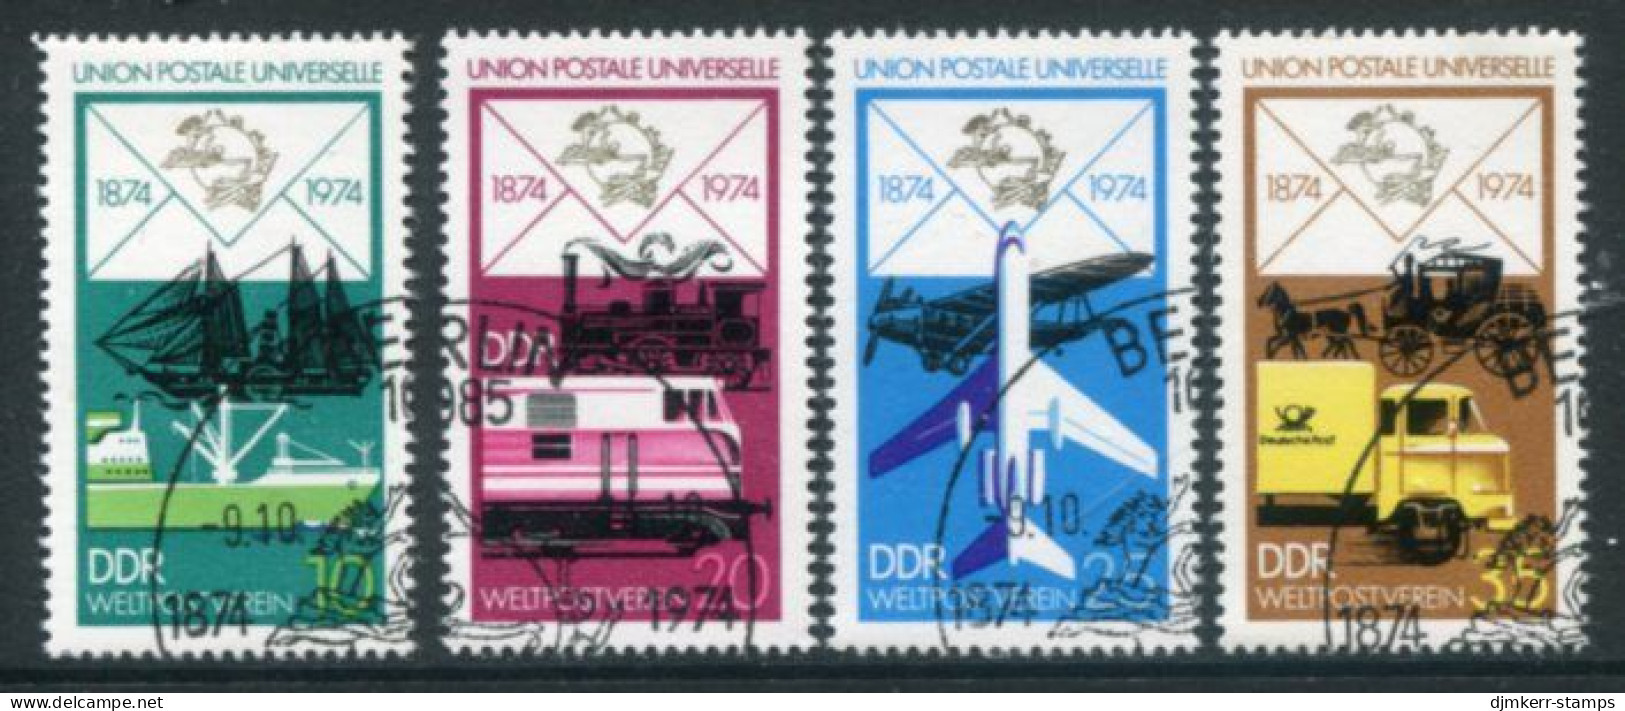 DDR / E. GERMANY 1974 UPU Centenary Used.  Michel 1984-87 - Used Stamps